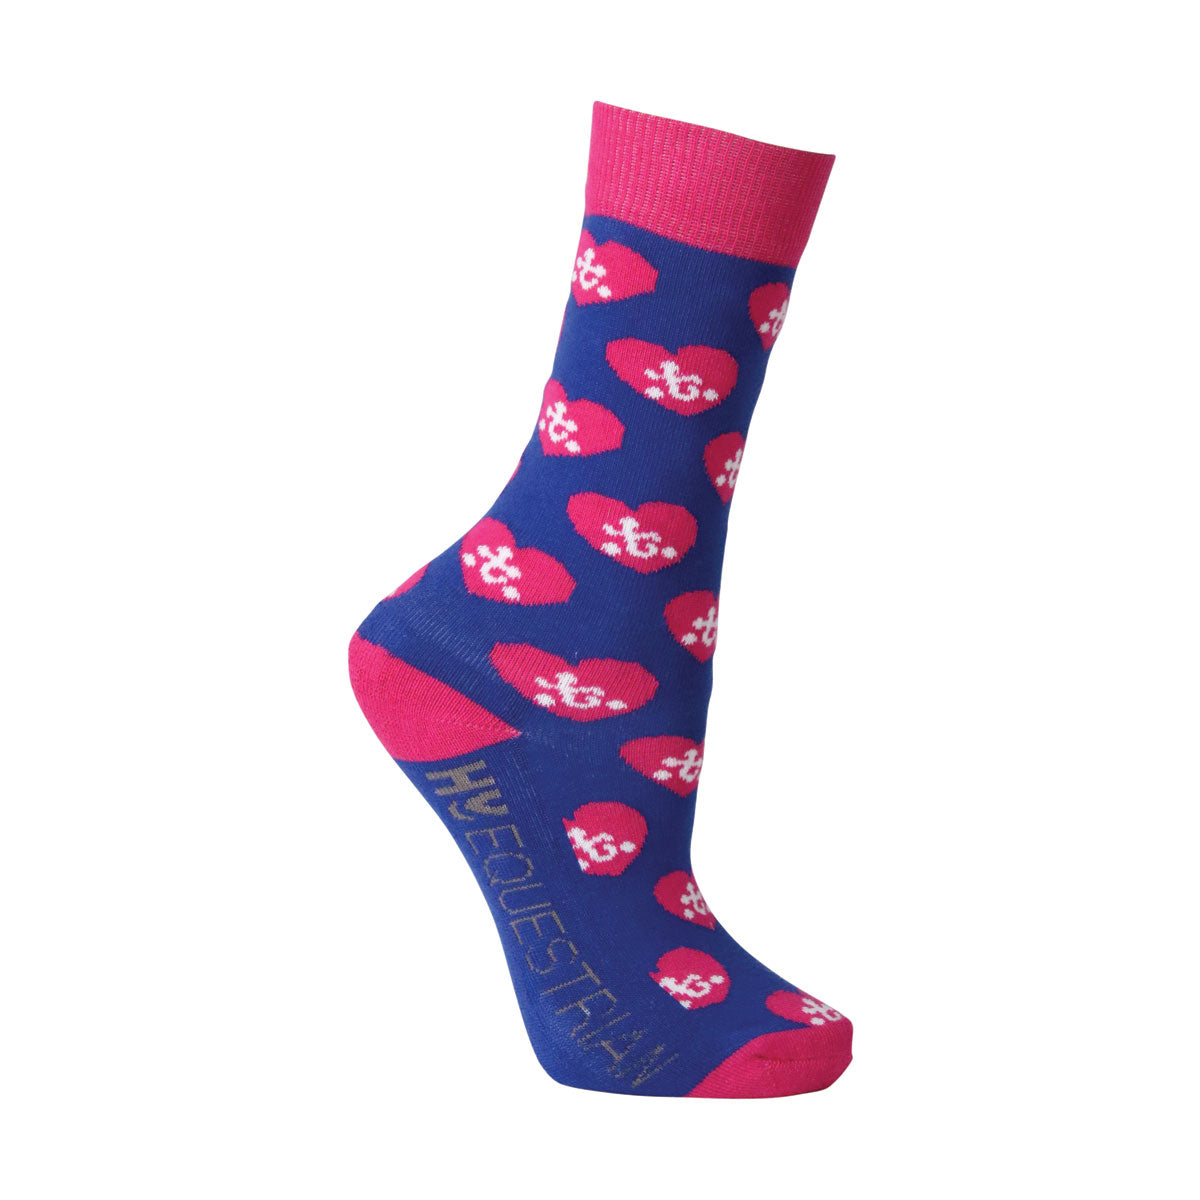 Thelwell's Race Collection Socks (Pack of 3)